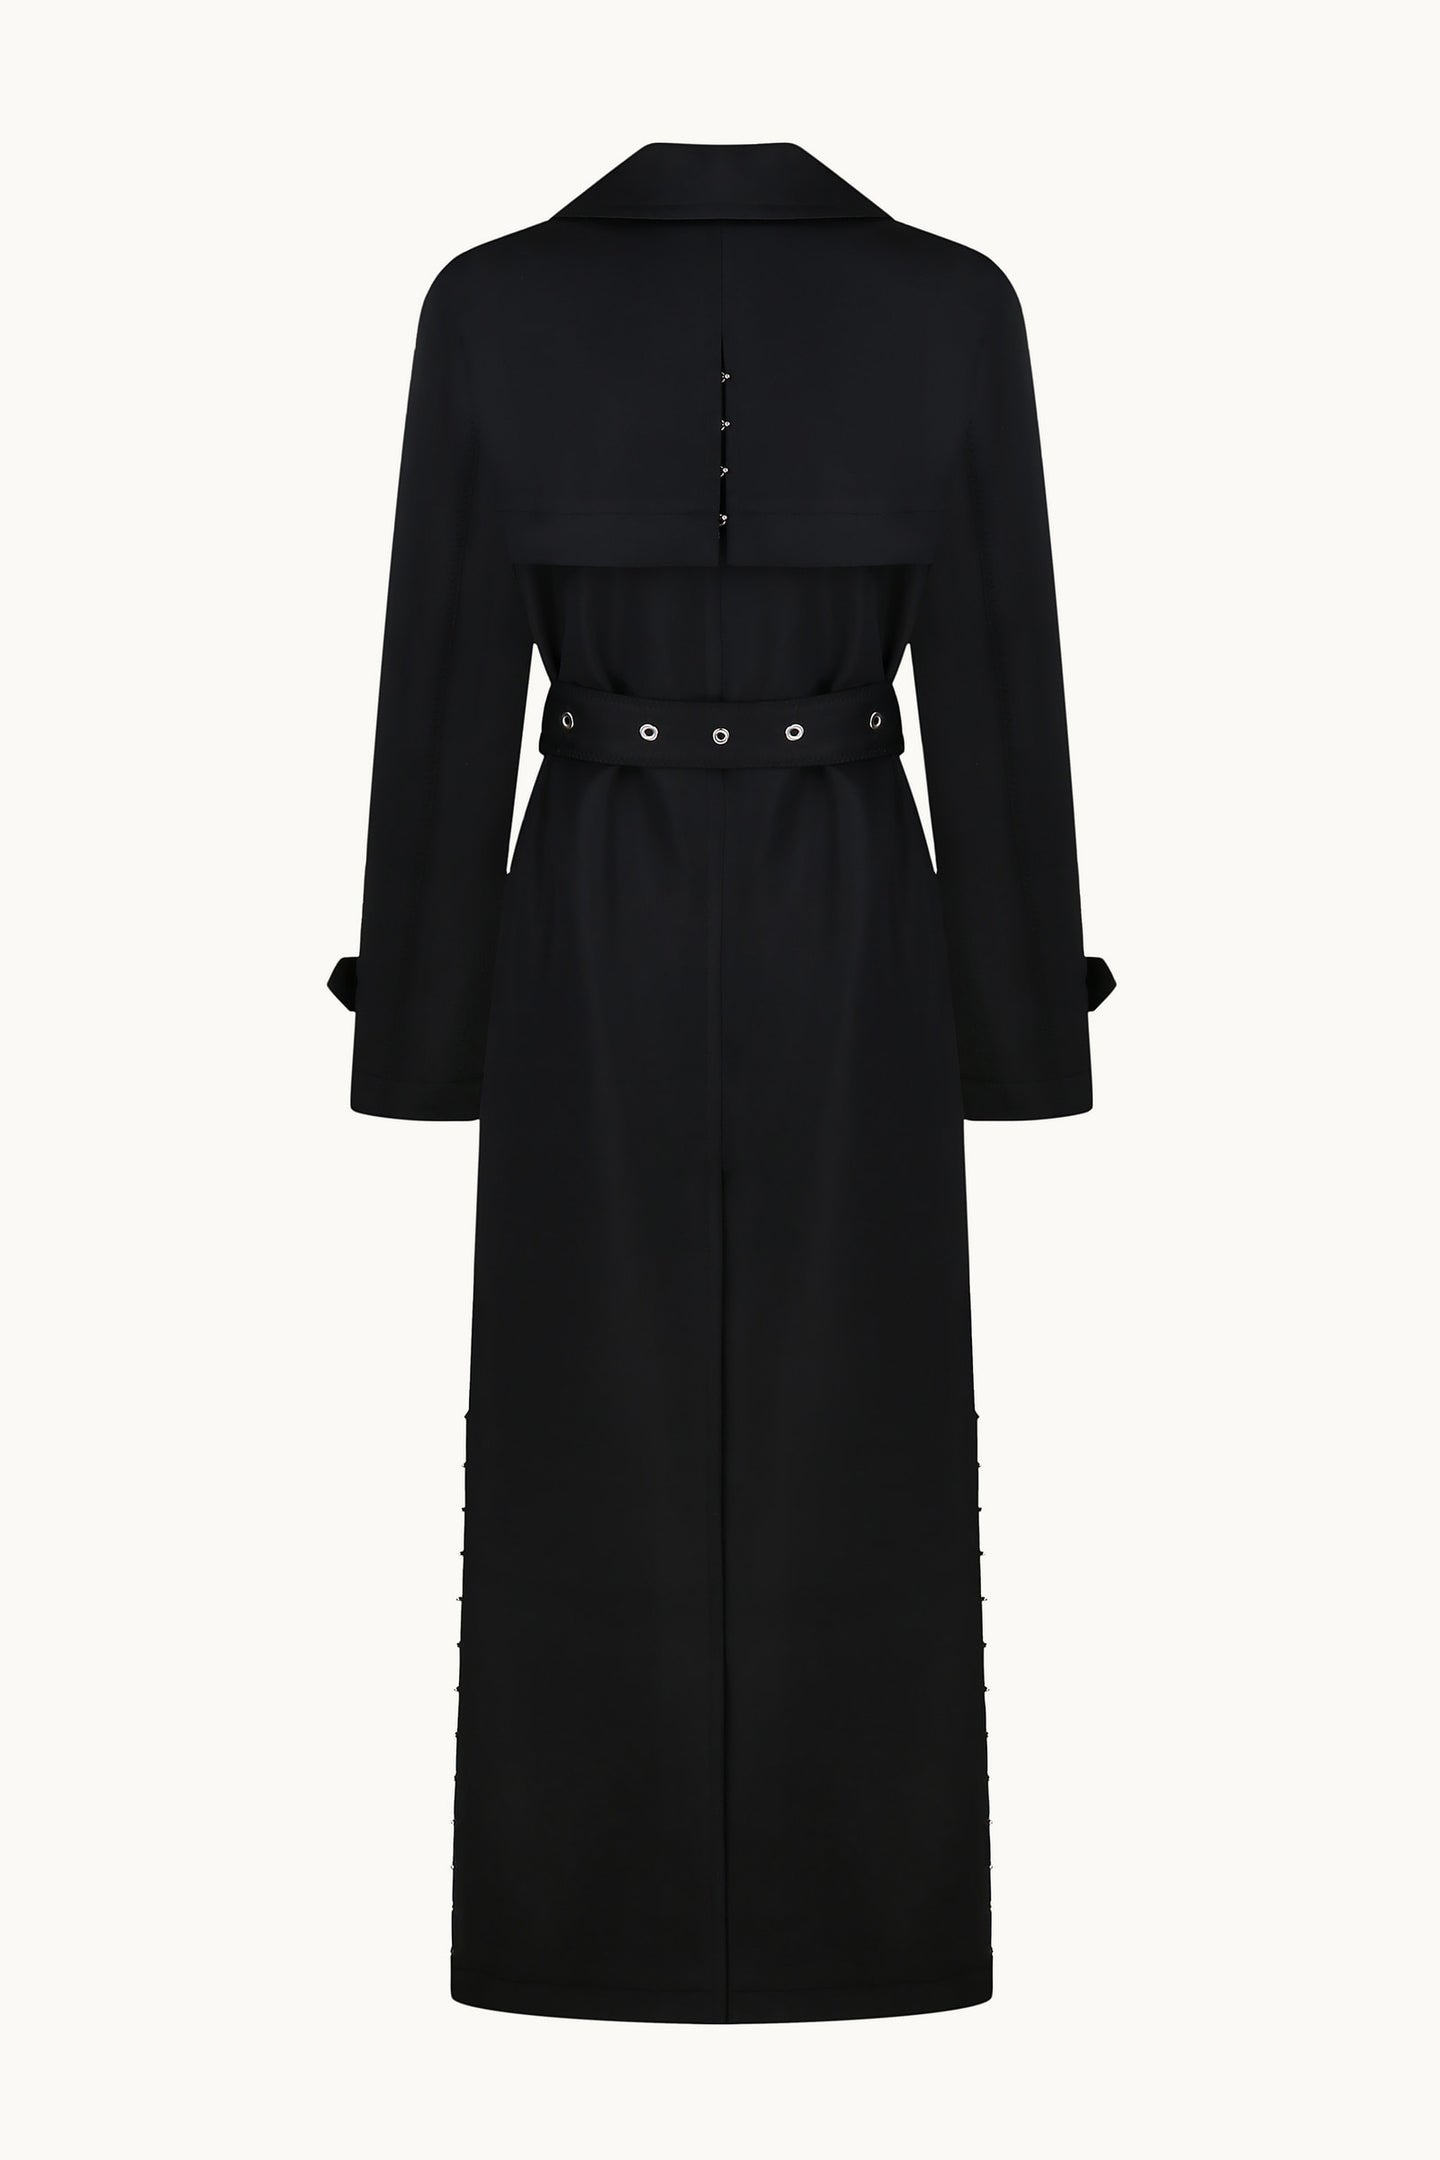 Hannah black trench back view